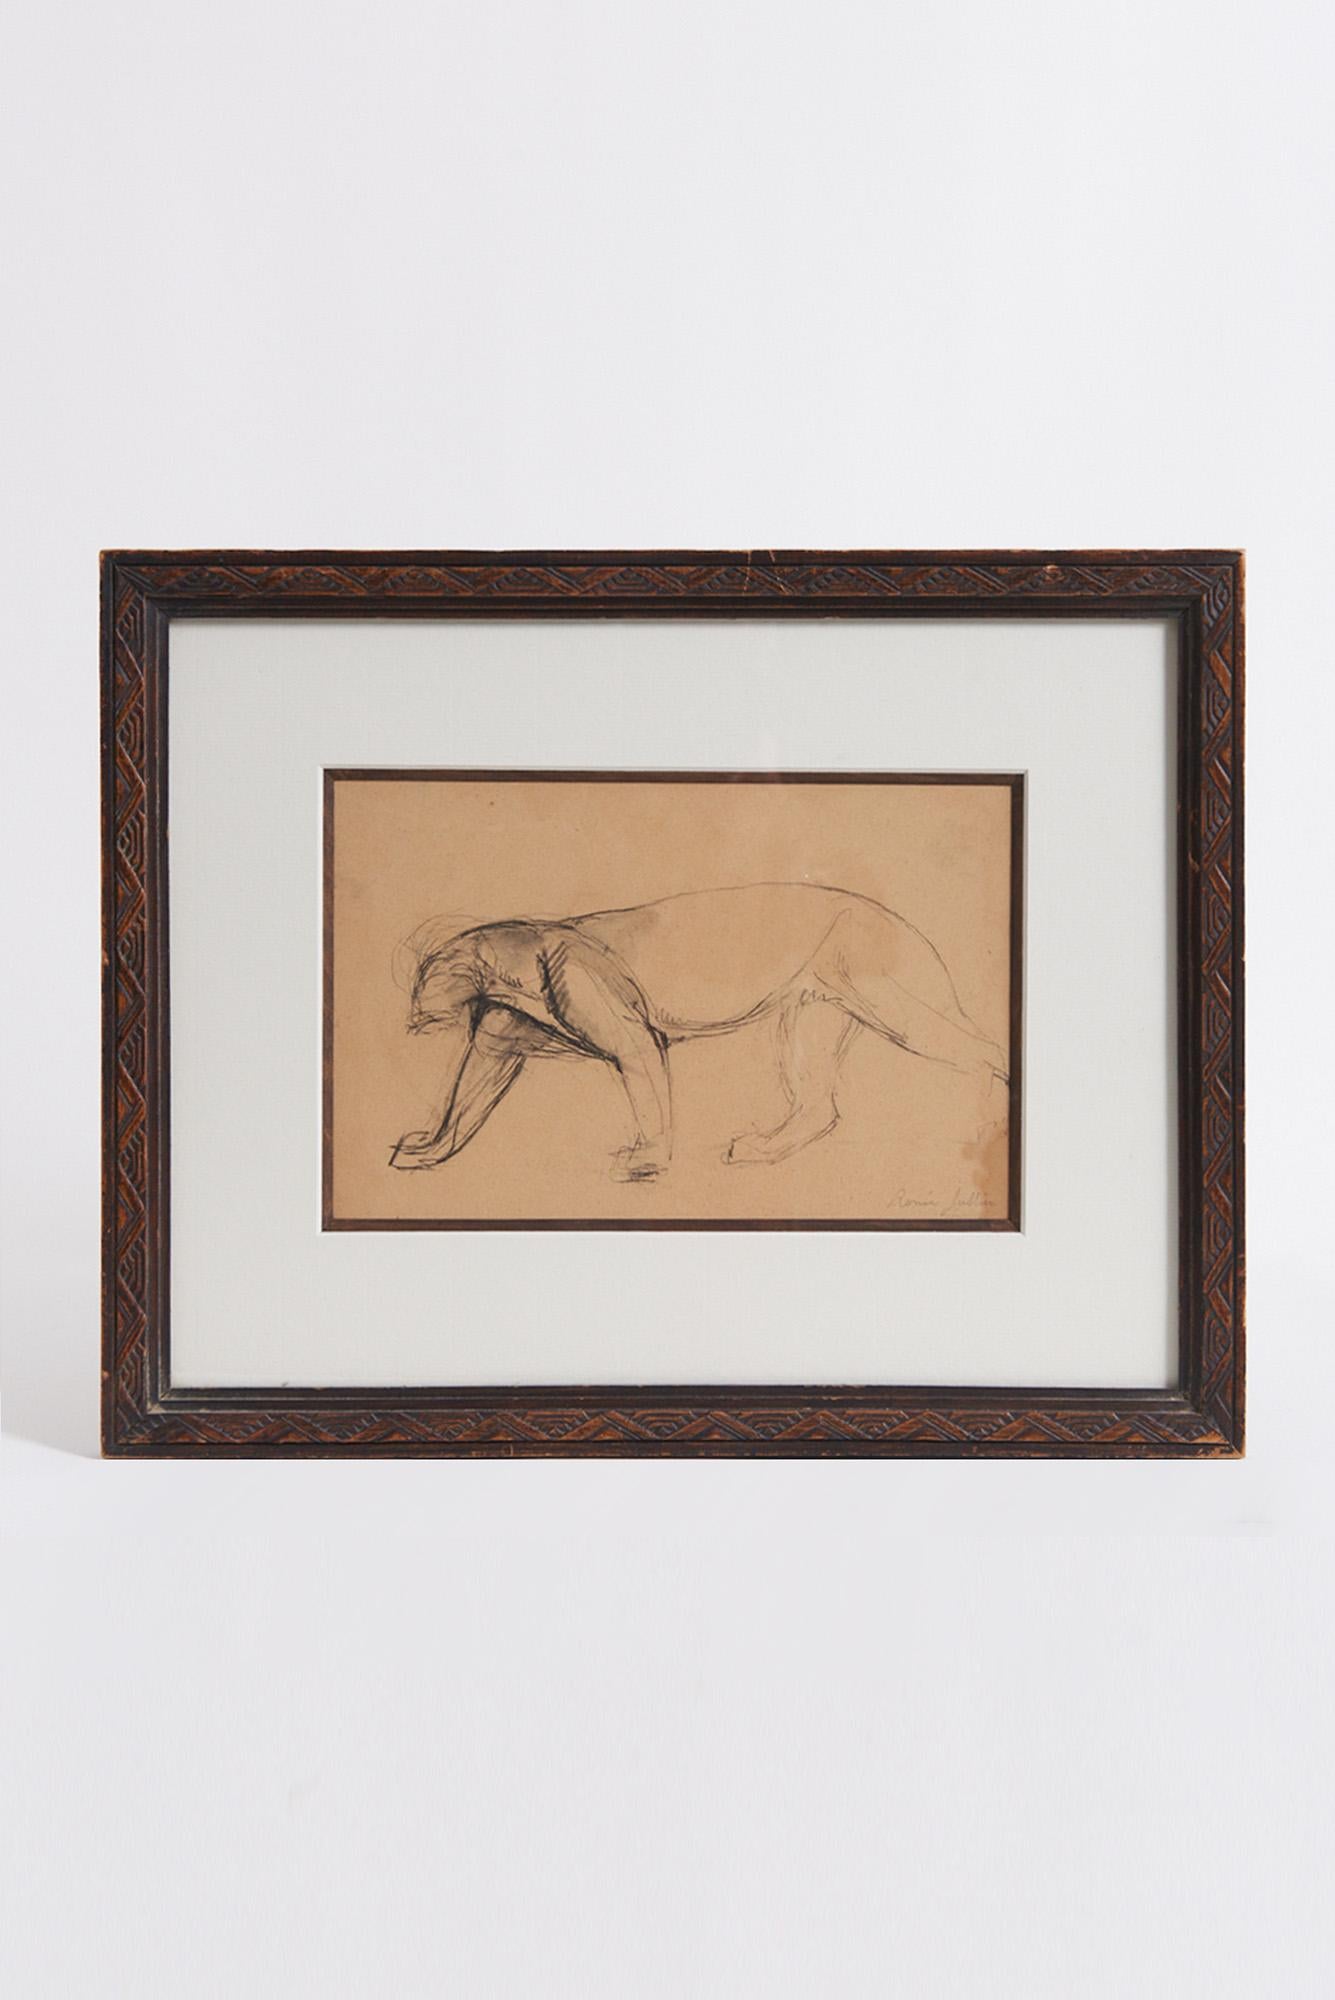 An Art Deco drawing
Signed Renee Jullian
France, early 20th Century
30.5 cm high by 38.5 cm wide by 2 cm depth